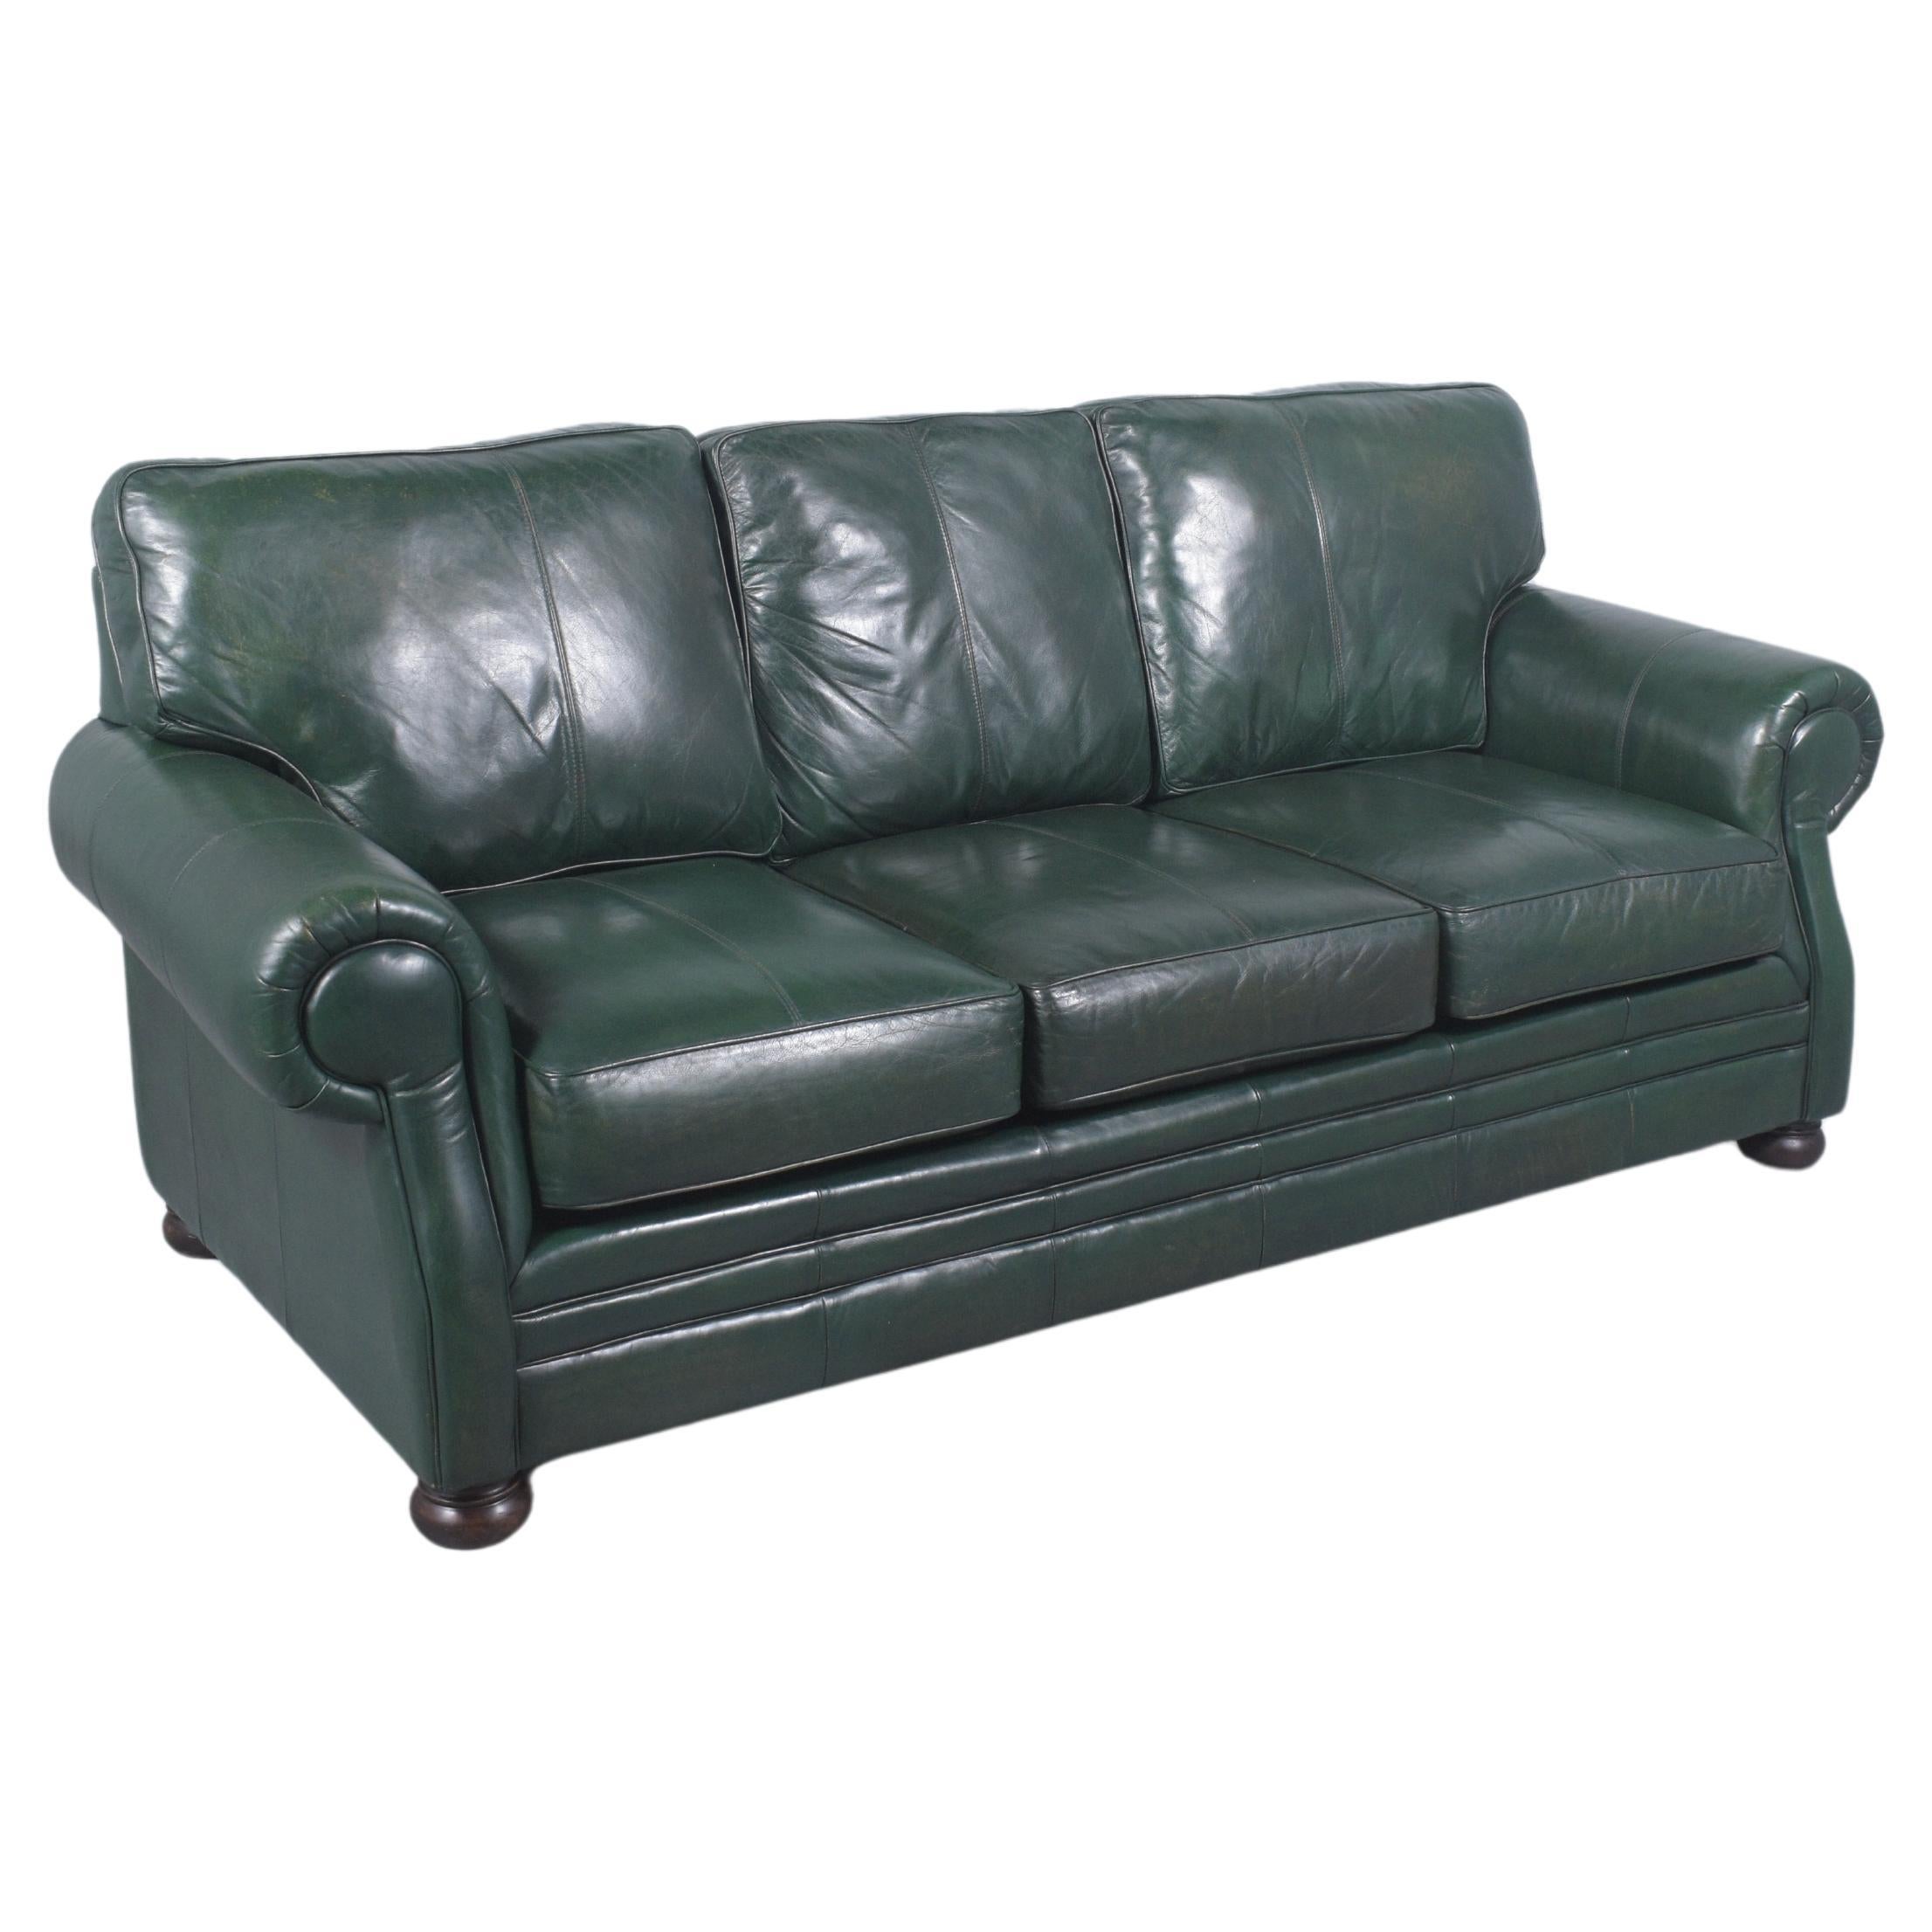 Restored 1980s Vintage Leather Sofa in Dark Green with Carved Bun Legs